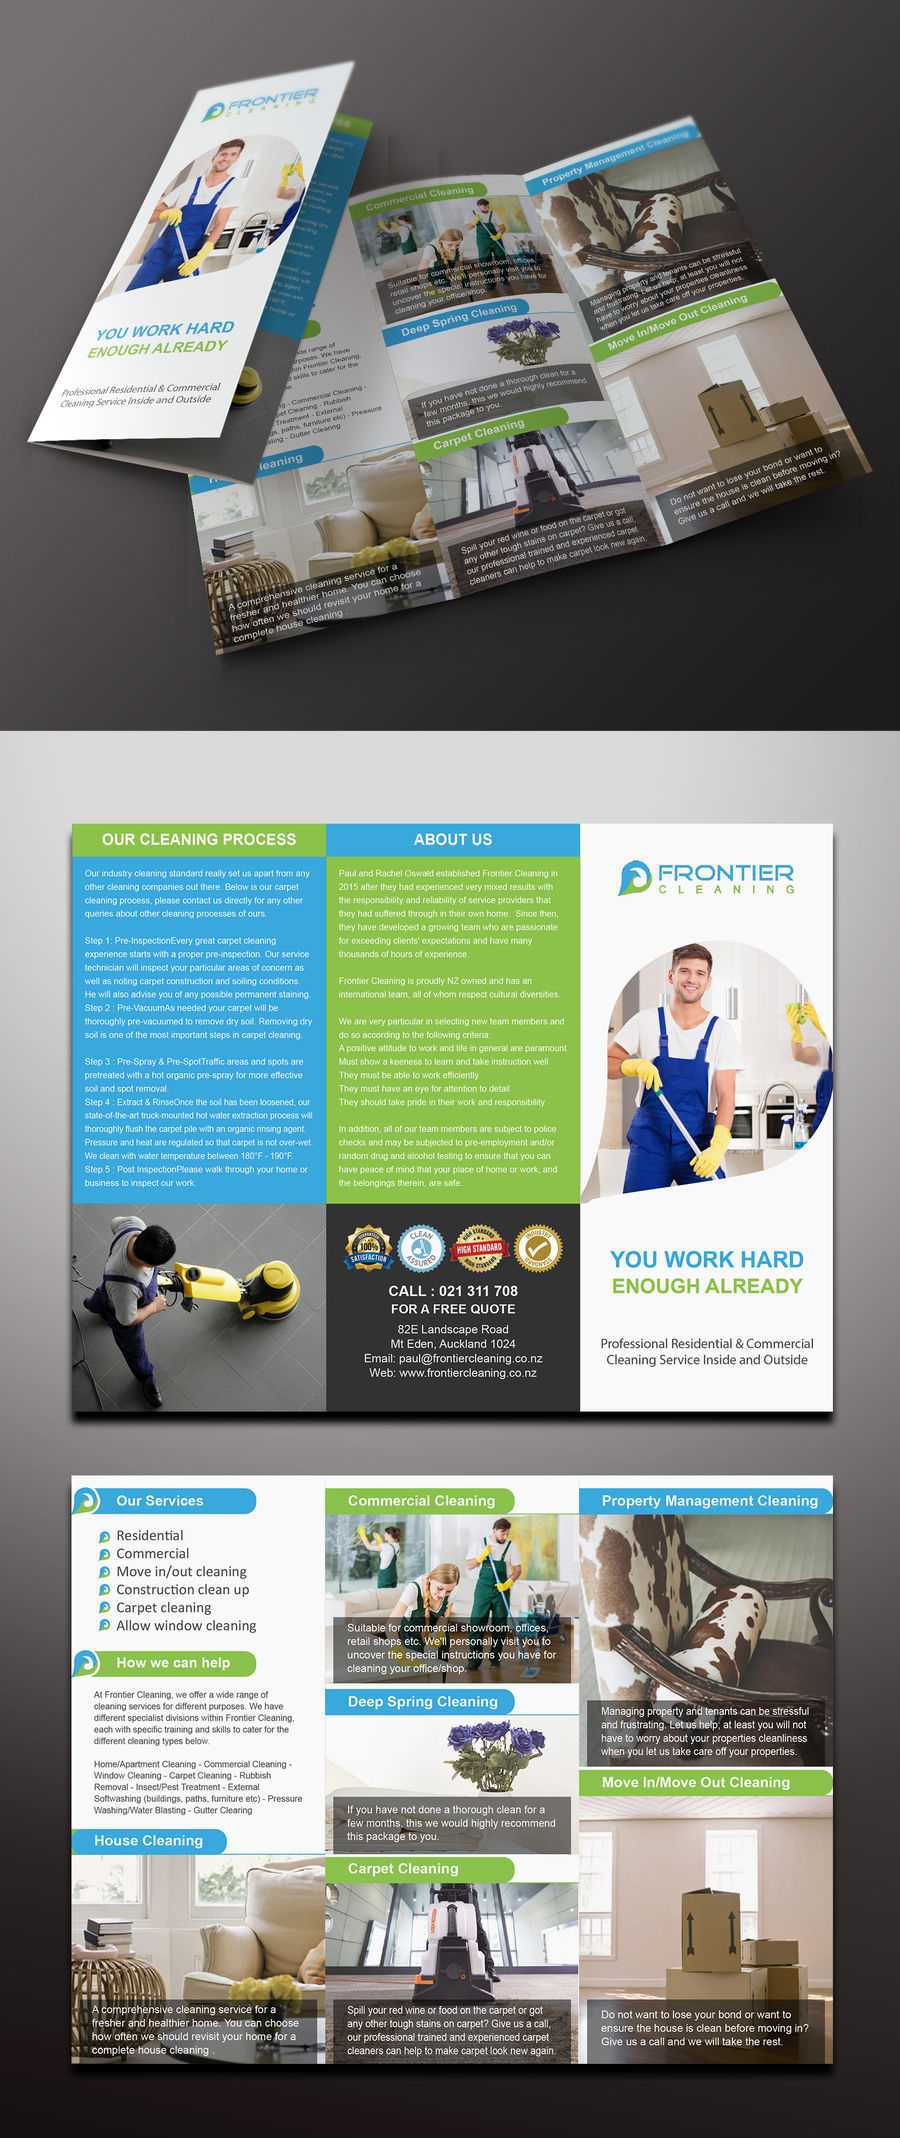 Entry #74Mamun313 For Design A 3 Fold Brochure, Business Throughout Commercial Cleaning Brochure Templates